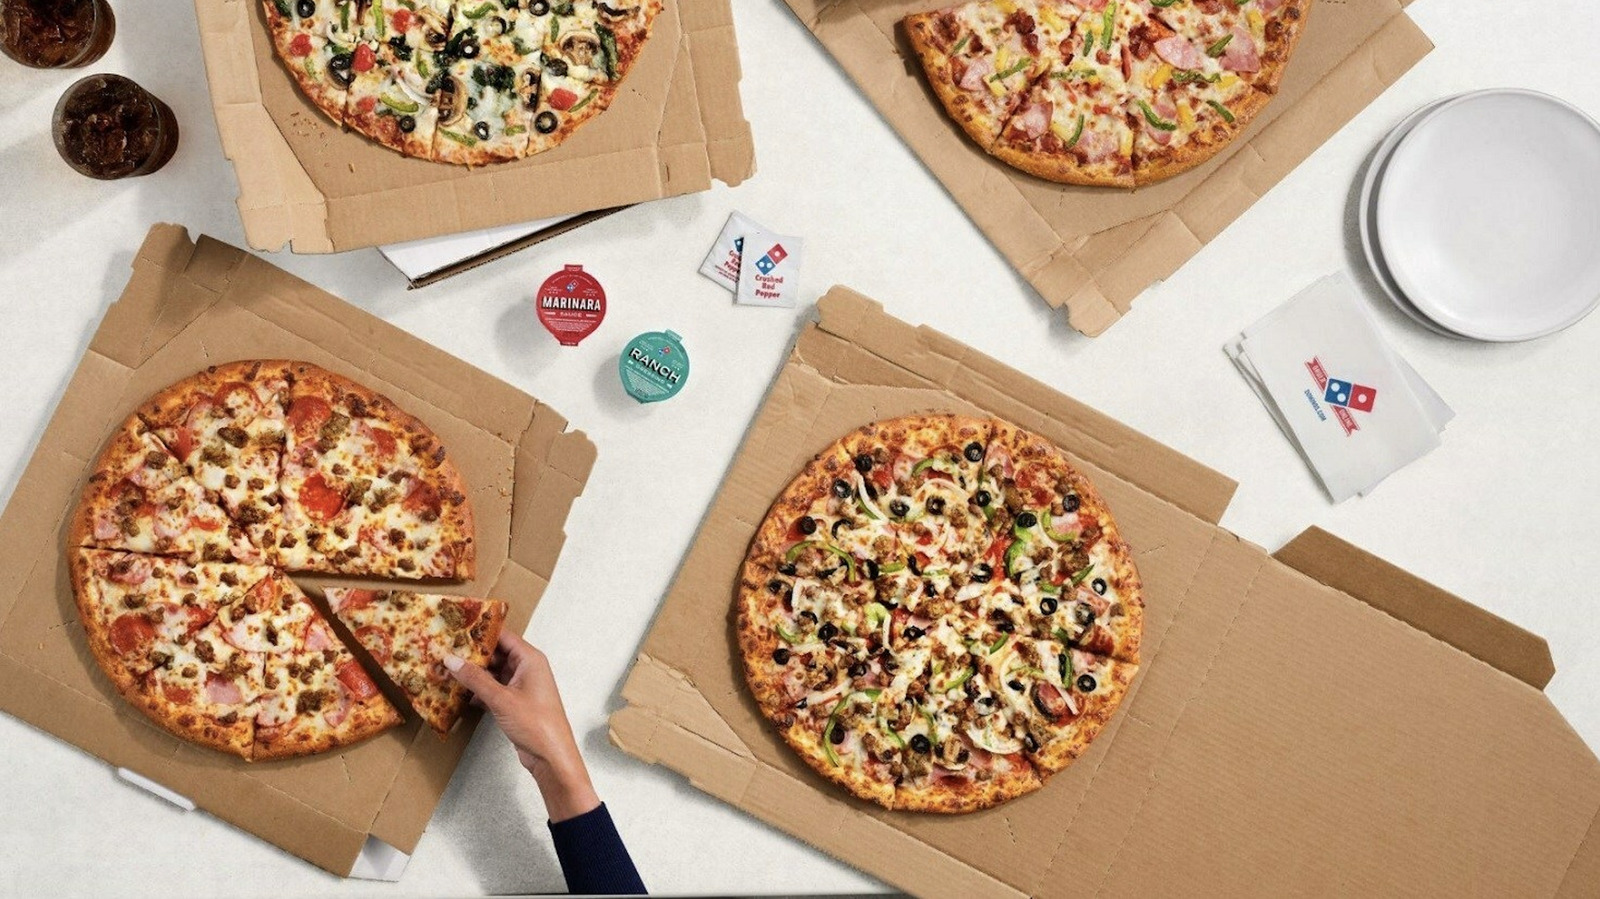 Here’s How To Get Any Domino’s Pizza For 50% Off This Week – The Daily Meal